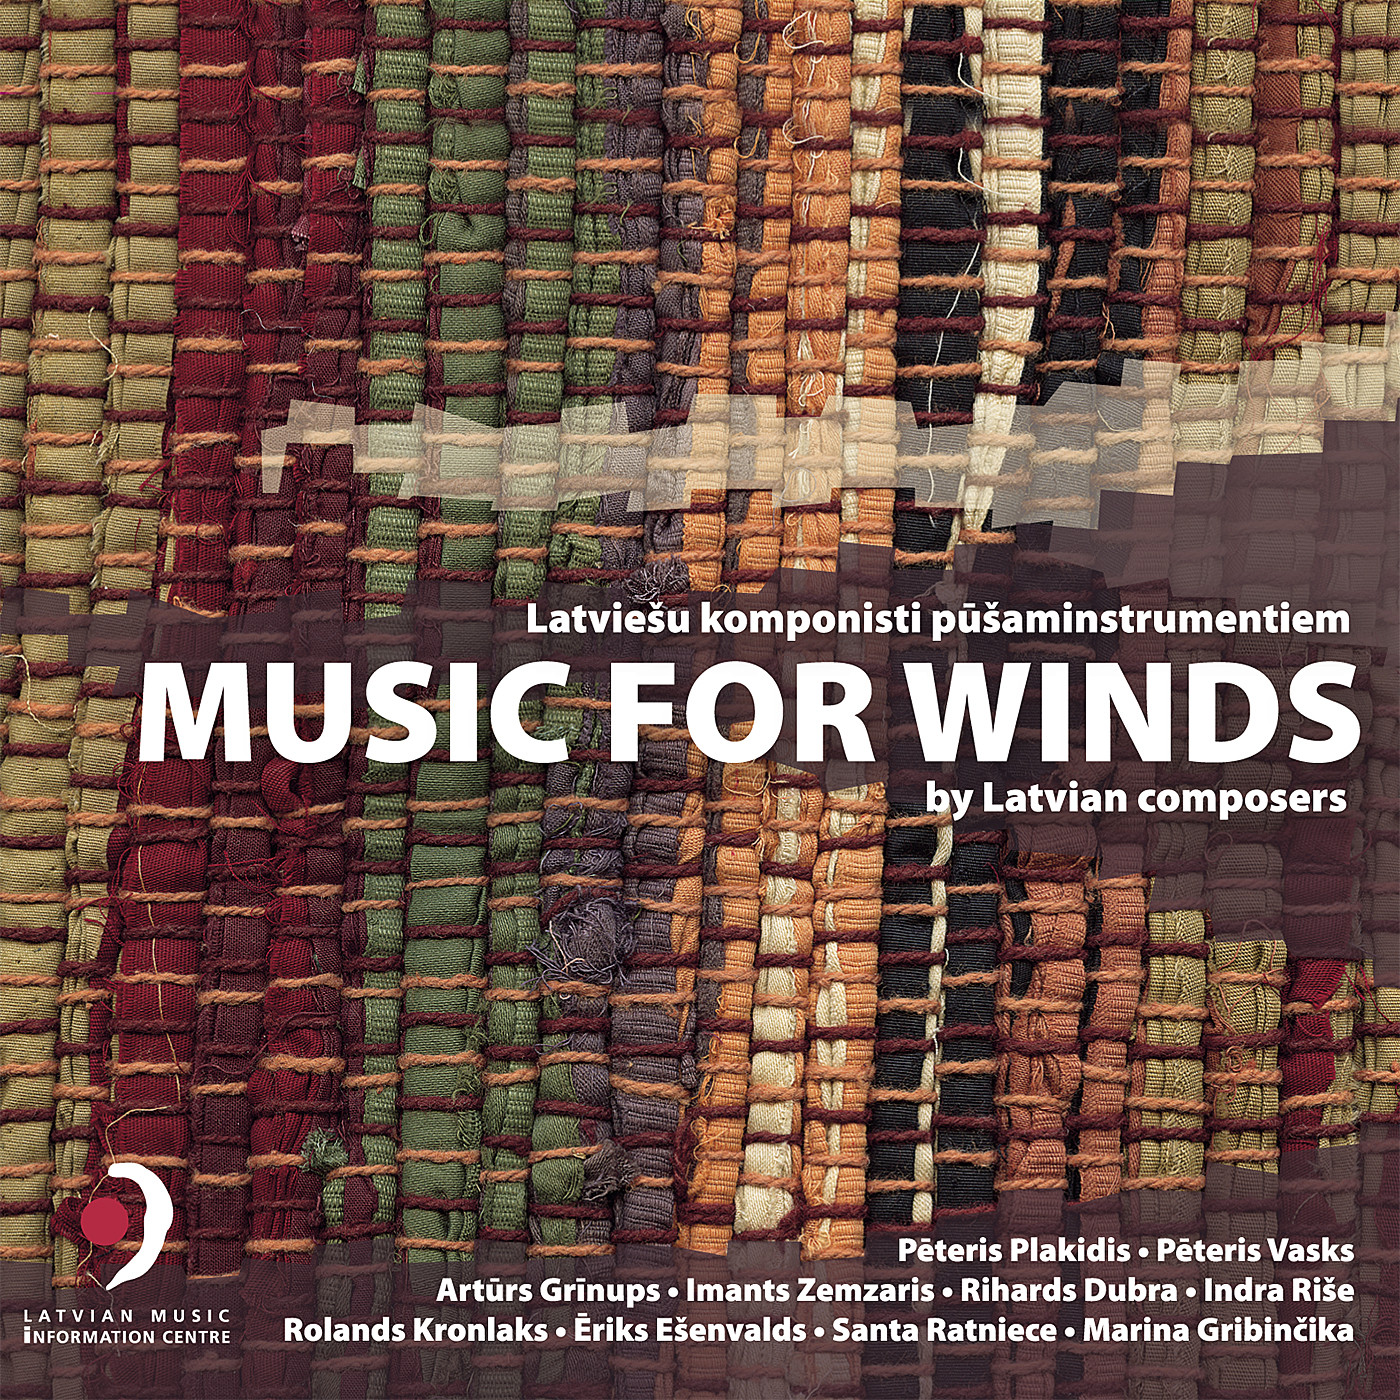 Music for Winds by Latvian composers